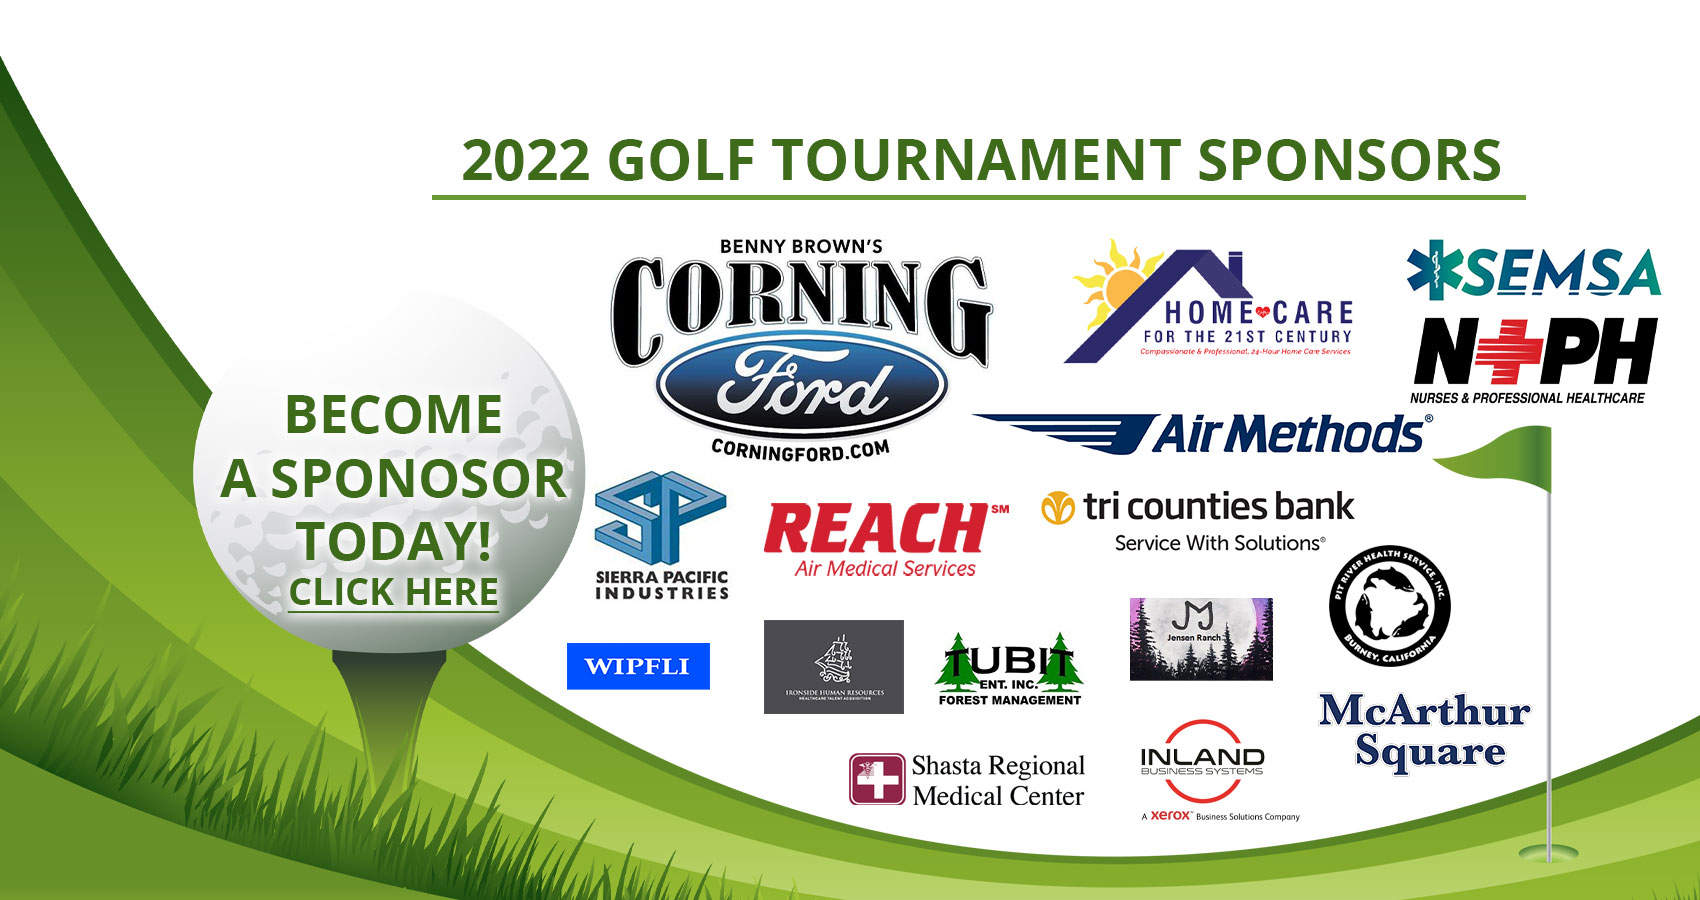 Banner Graphic of a golf ball sitting on a T  on a patch of grass. and a golf flag with the golf hole. Banner says:

BECOME A SPONSOR TODAY!
CLICK HERE

2022 SPONSORS:

BENNY BROWN'S CORNING
Ford Corningford.com
Home Care FOR THE 21ST CENTURY
*Compassinate & Professional 24-Hour Care Services

Tri counties bank
Service With Solutions